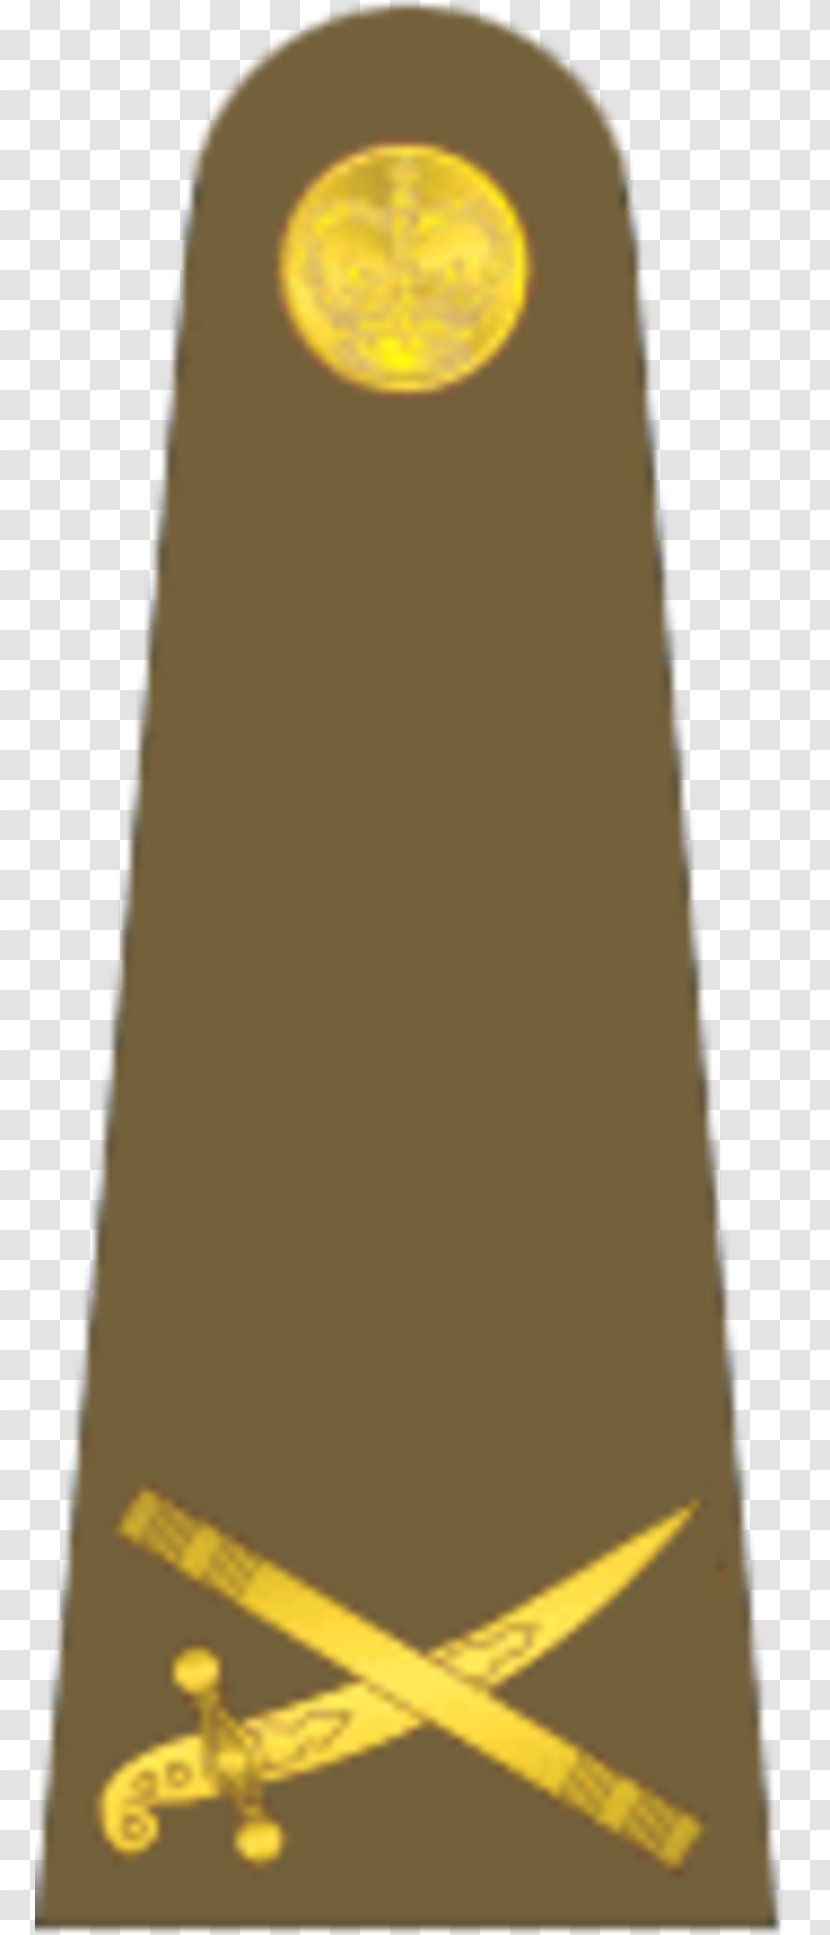 British Army Officer Rank Insignia Armed Forces Military General Transparent PNG